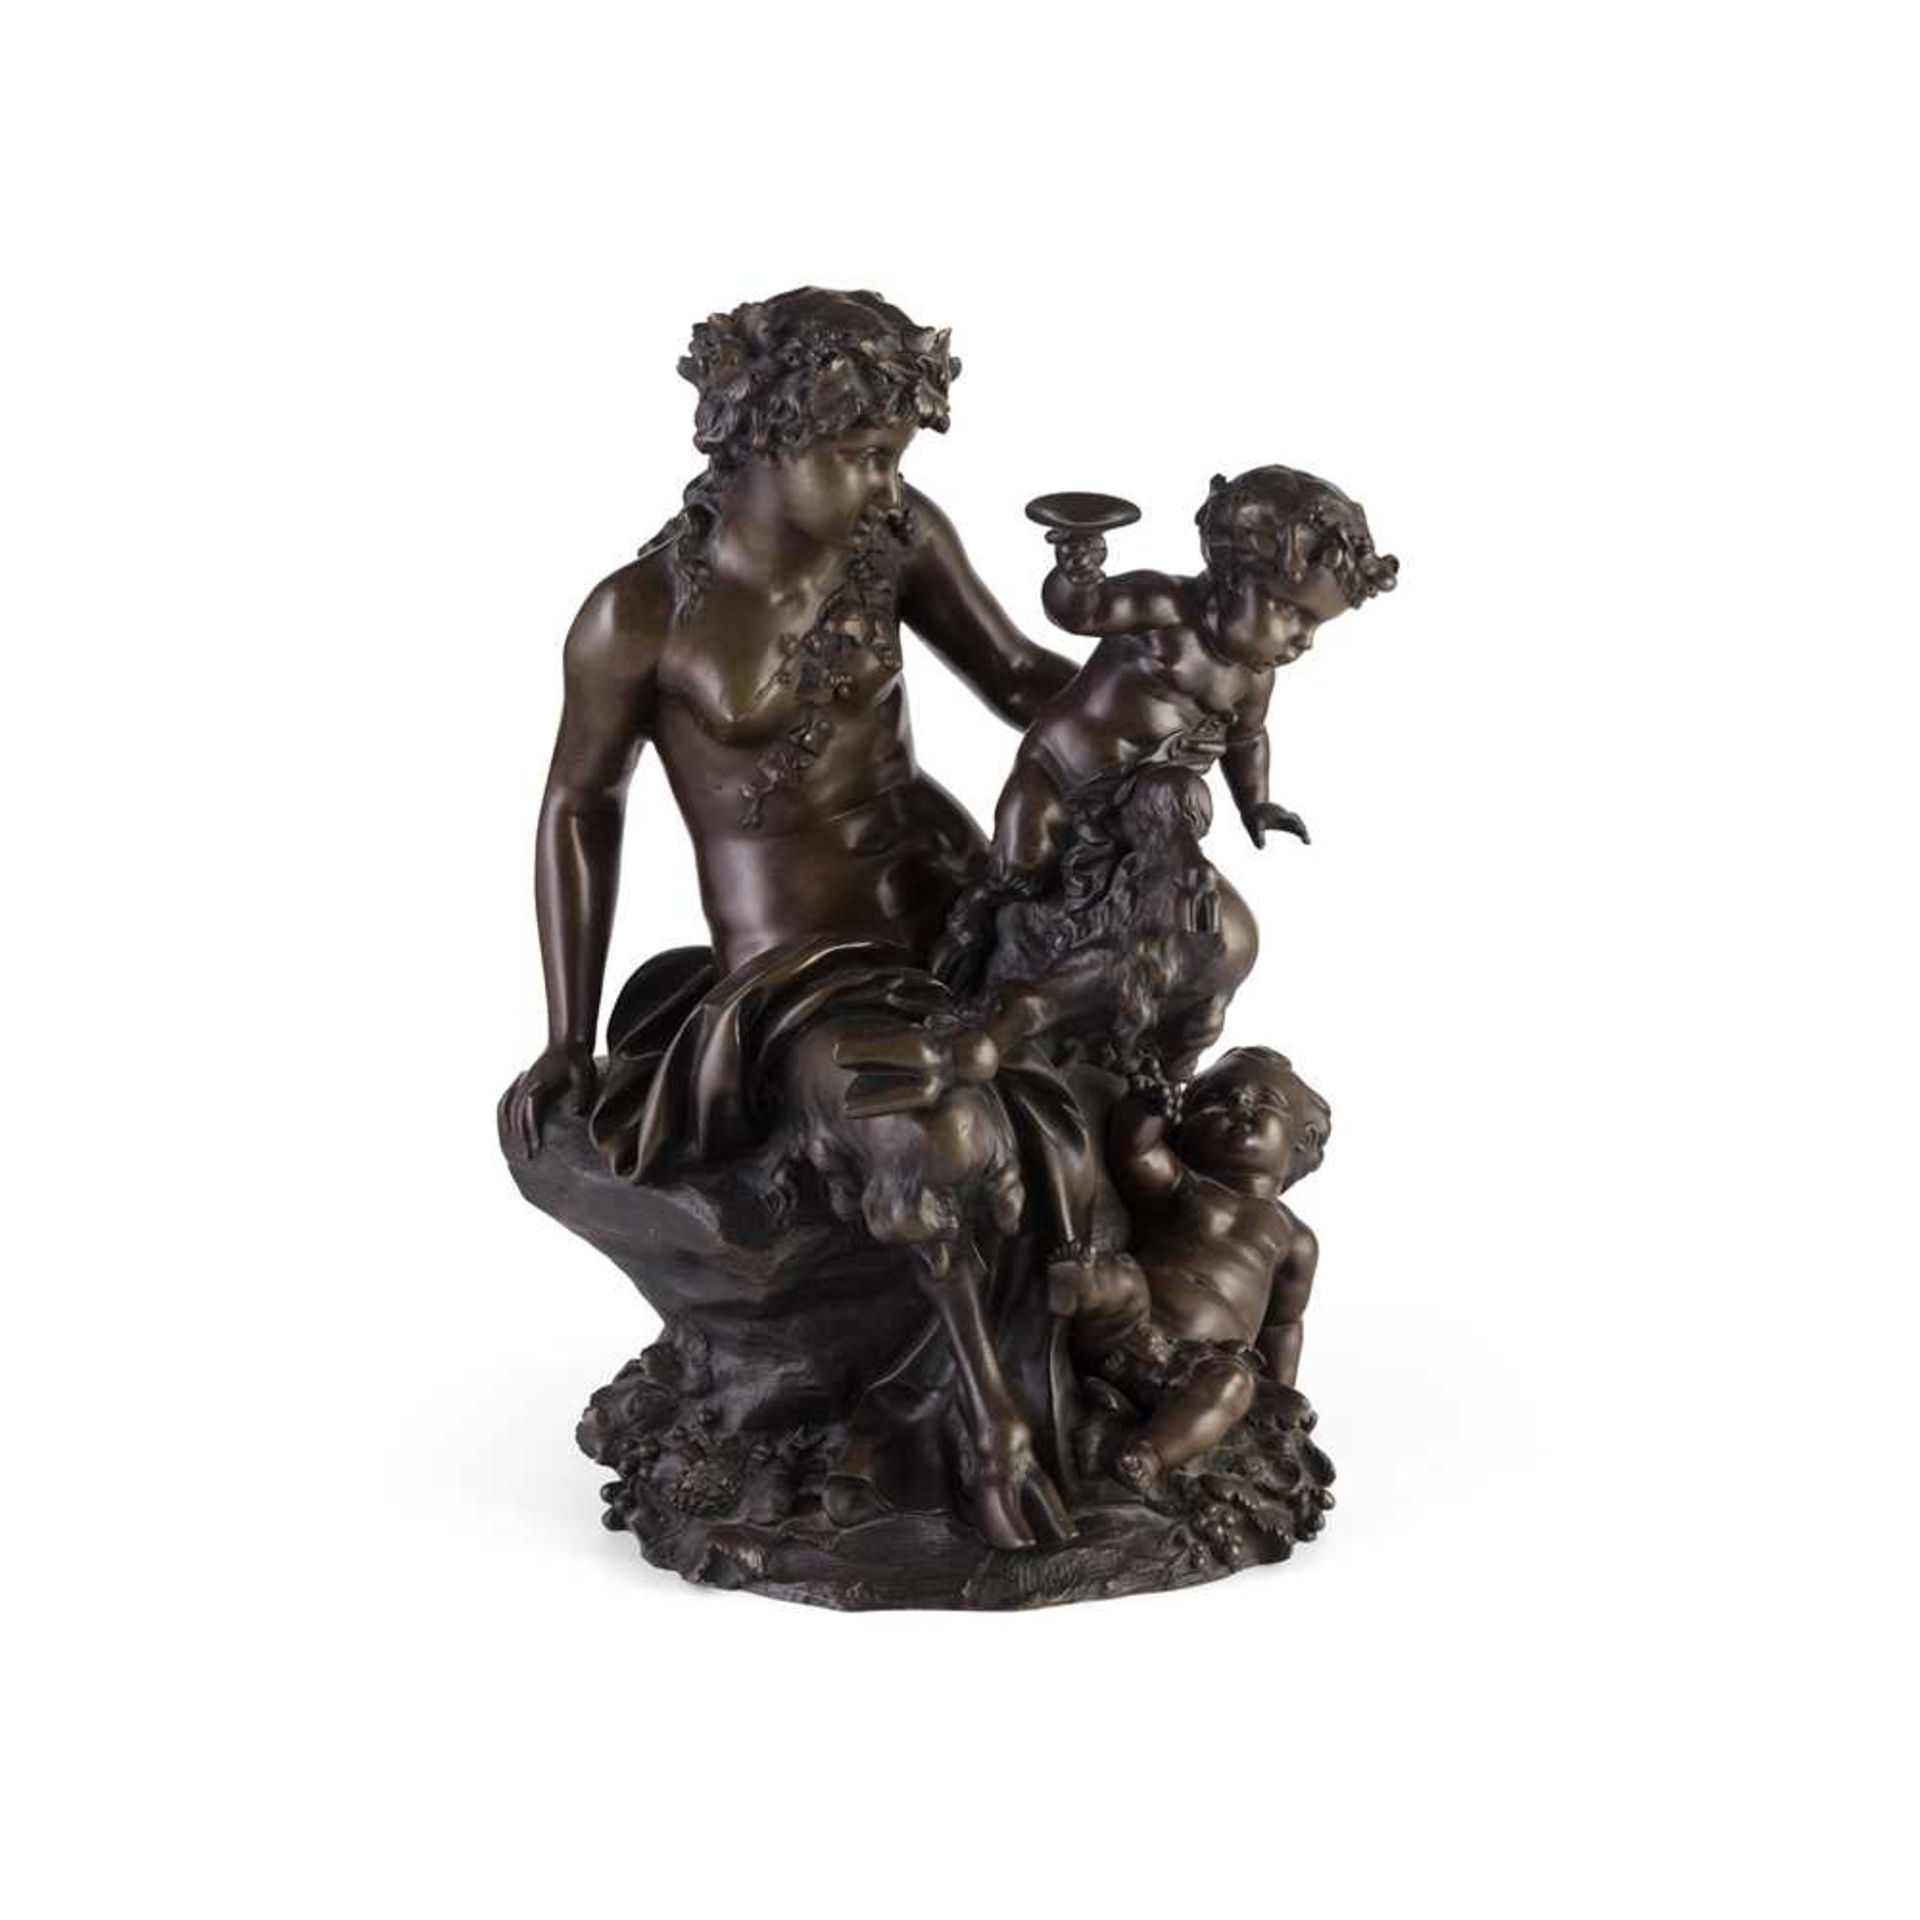 FRENCH BRONZE BACCHIC FIGURE GROUP, AFTER CLODION 19TH CENTURY